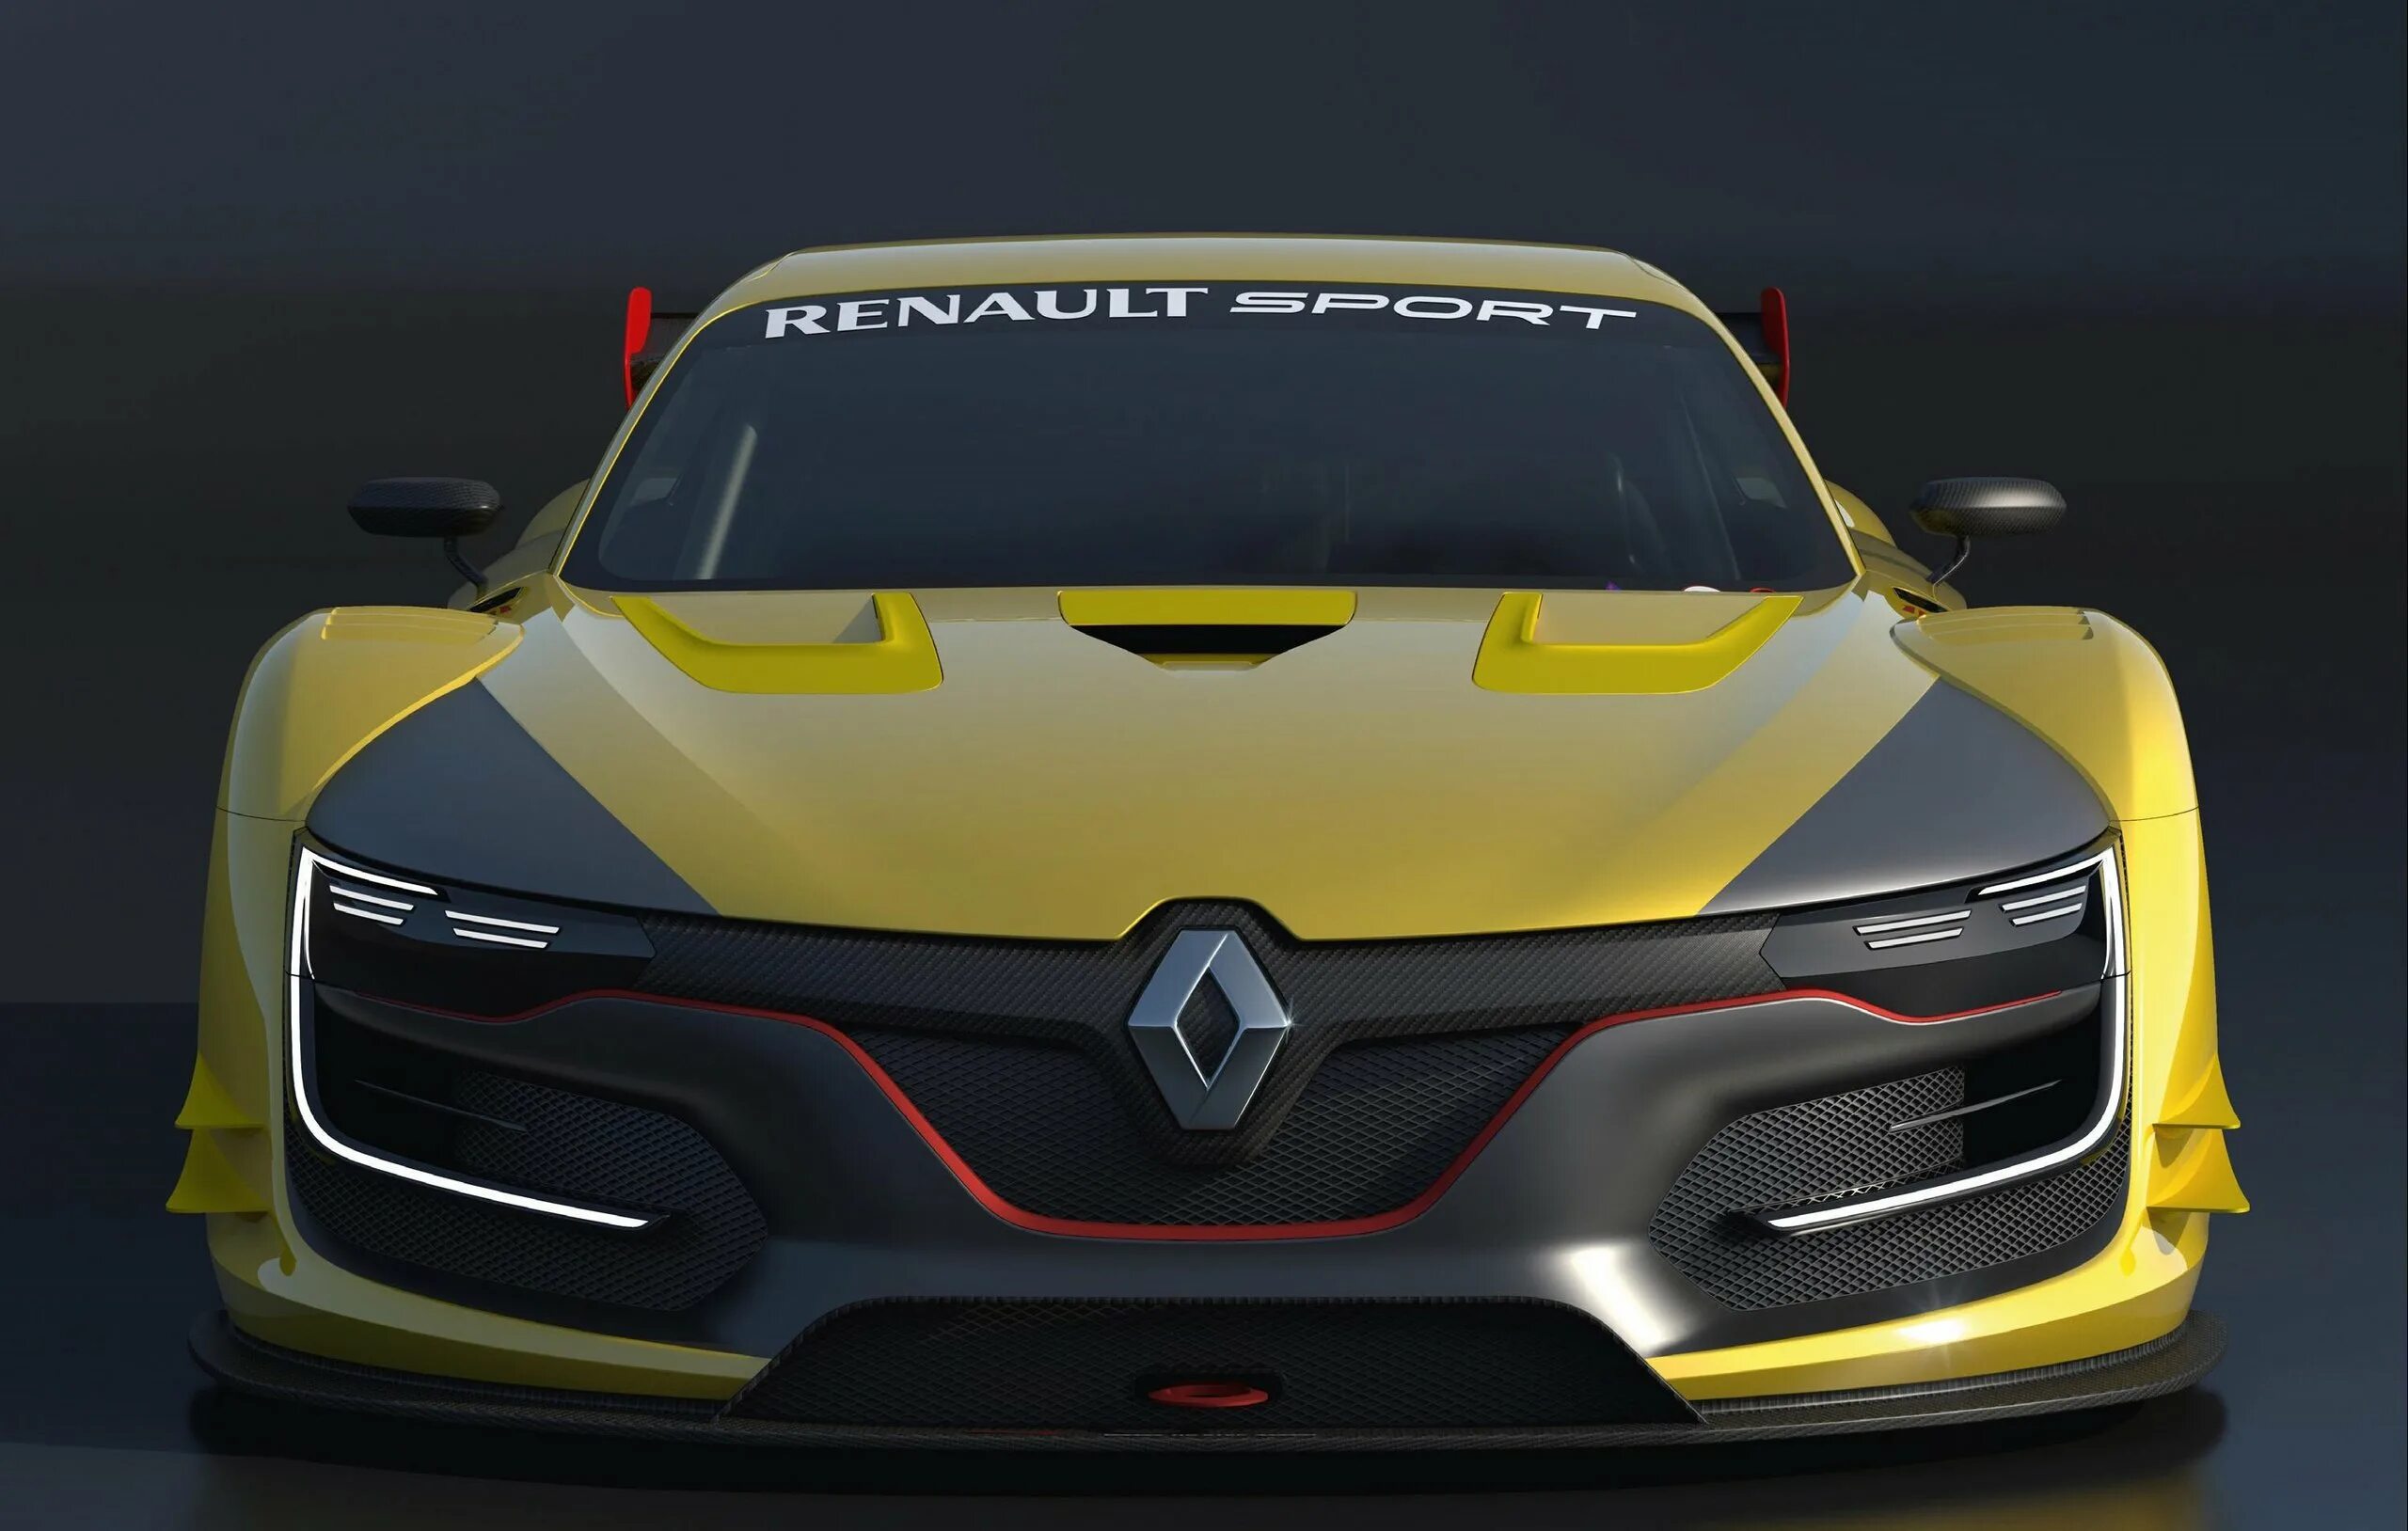 Renault rs01. Renault rs01 2021. Renault Sport RS 01. Концепт Renault RS.01. Ренаулт машина